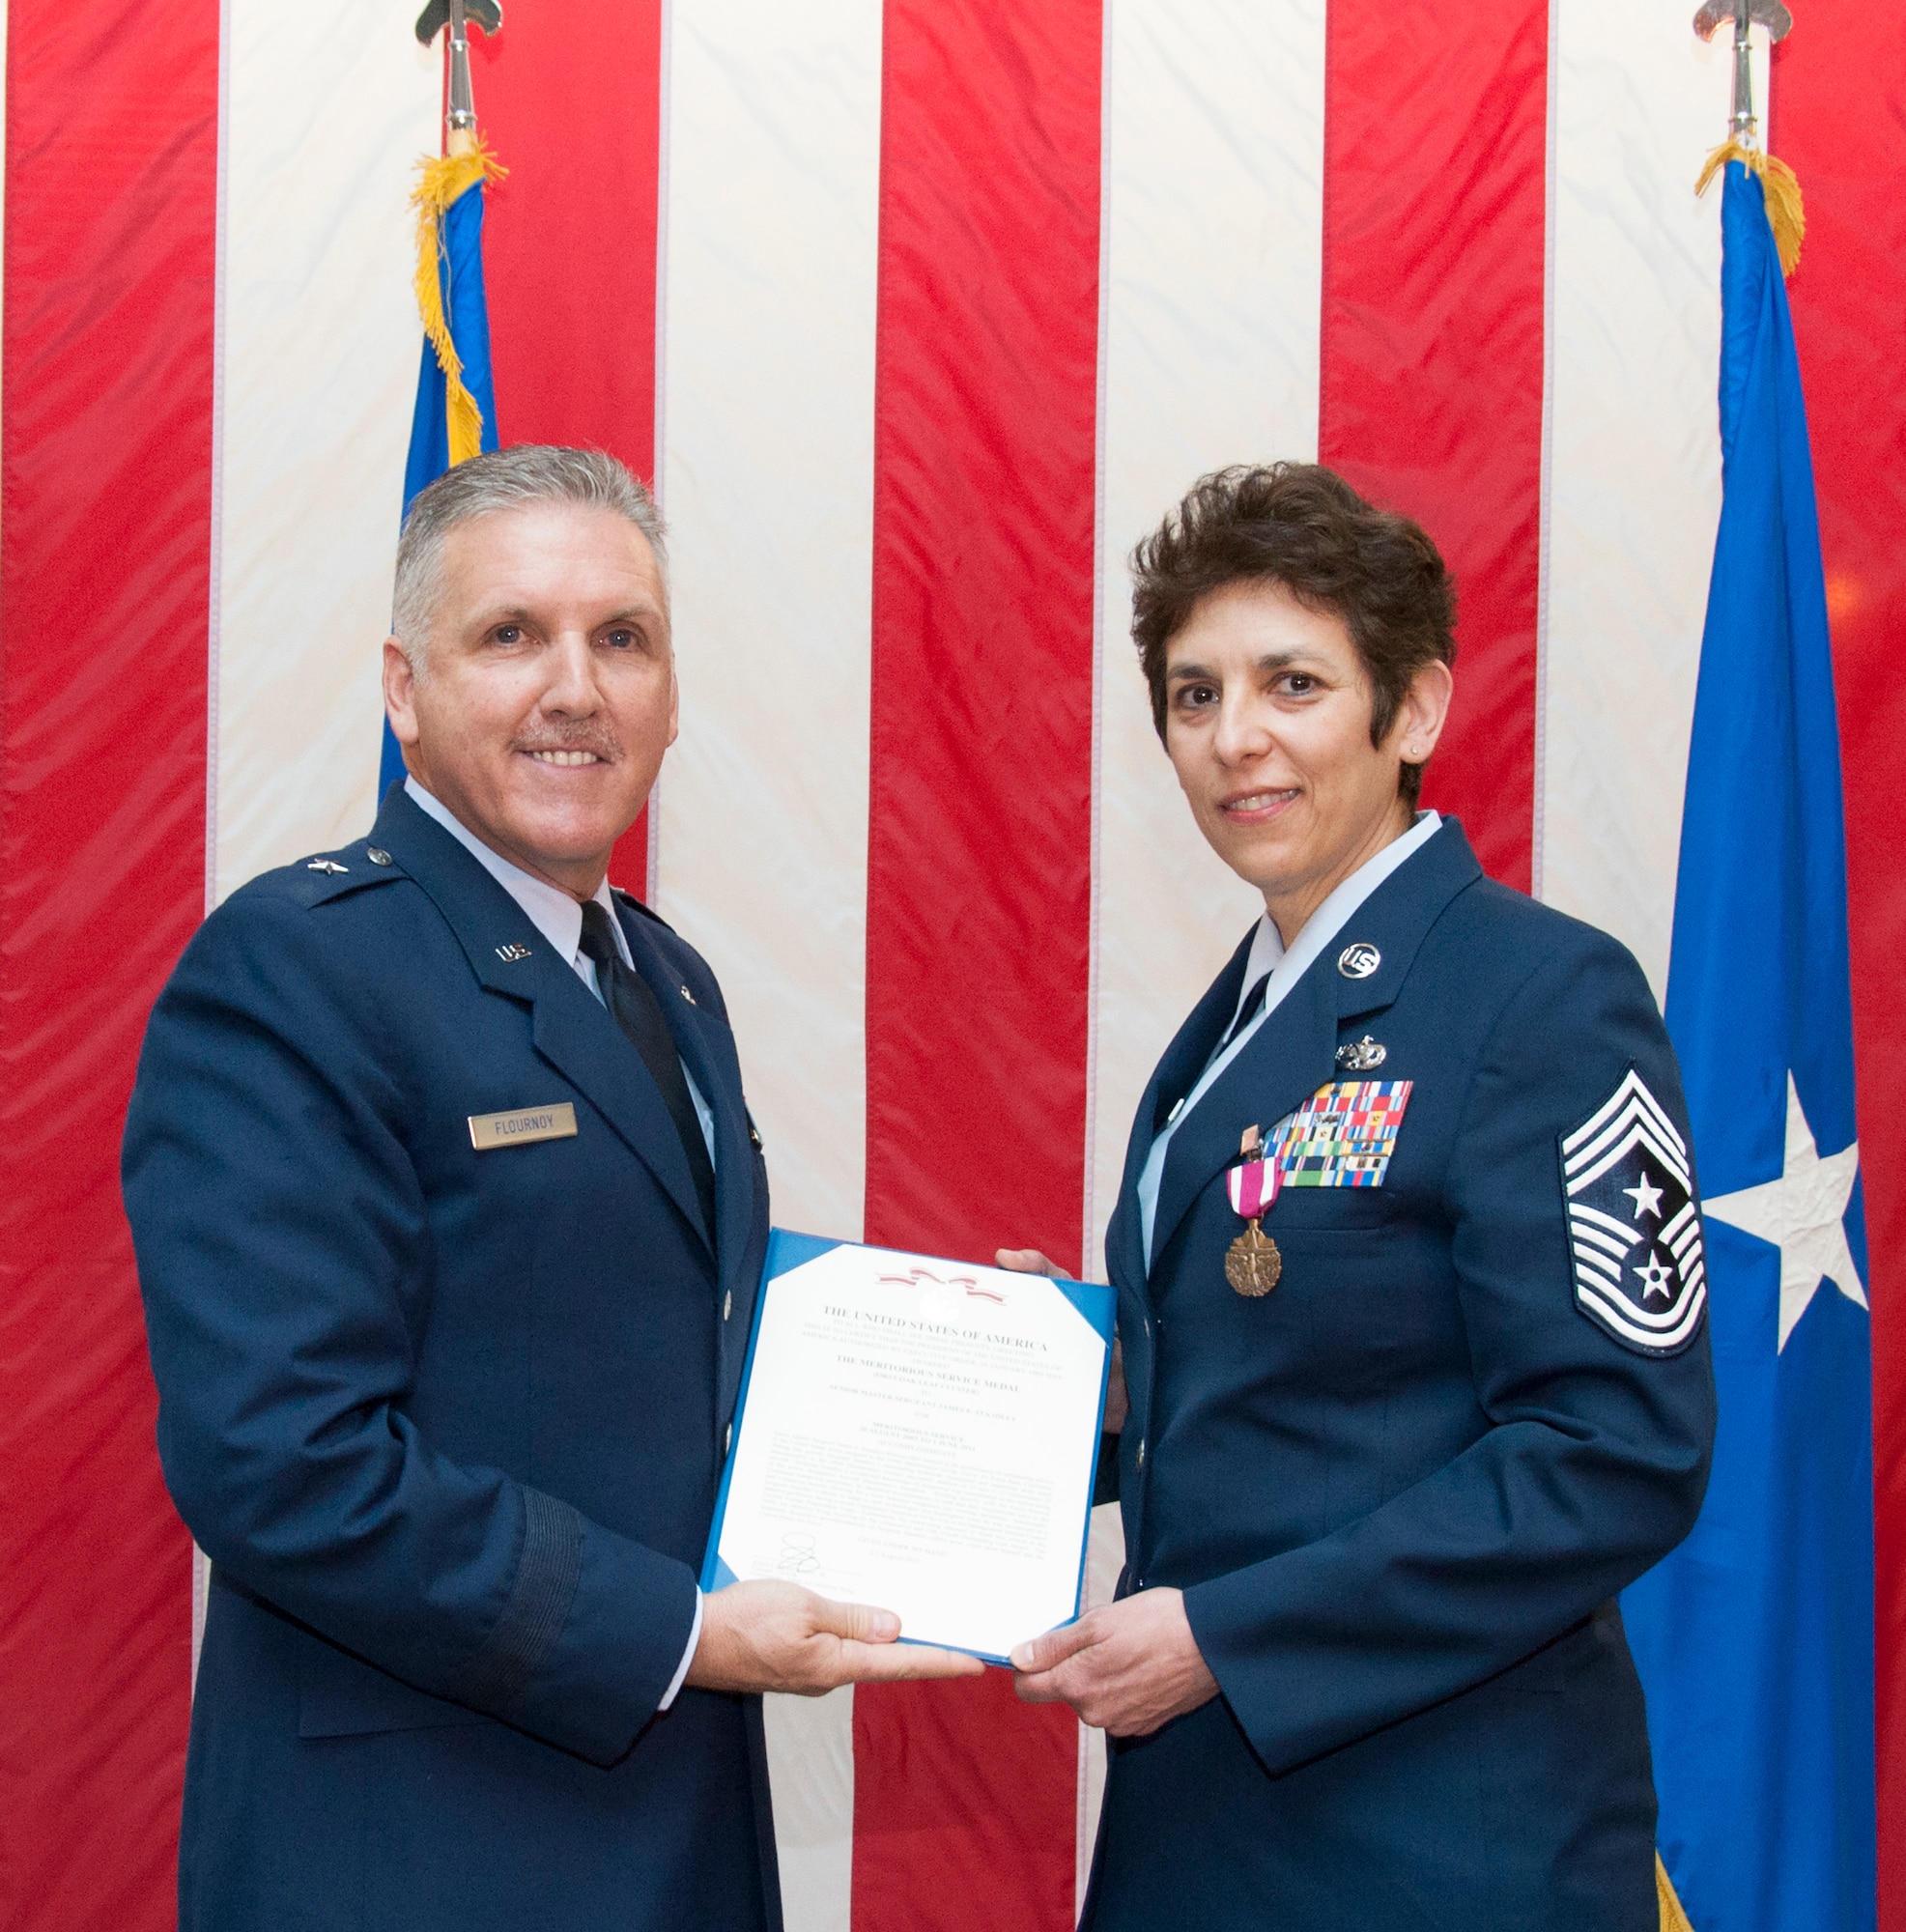 TRAVIS AIR FORCE BASE, Calif. -- Chief Master Sgt. Sandra "Sunny" Santos, 349th Air Mobility Wing, retired after nearly 33 years of service at a ceremony March 9, at Travis Air Force Base, Calif. (U.S. Air Force photos / Master Sgt. Rachel Martinez)

